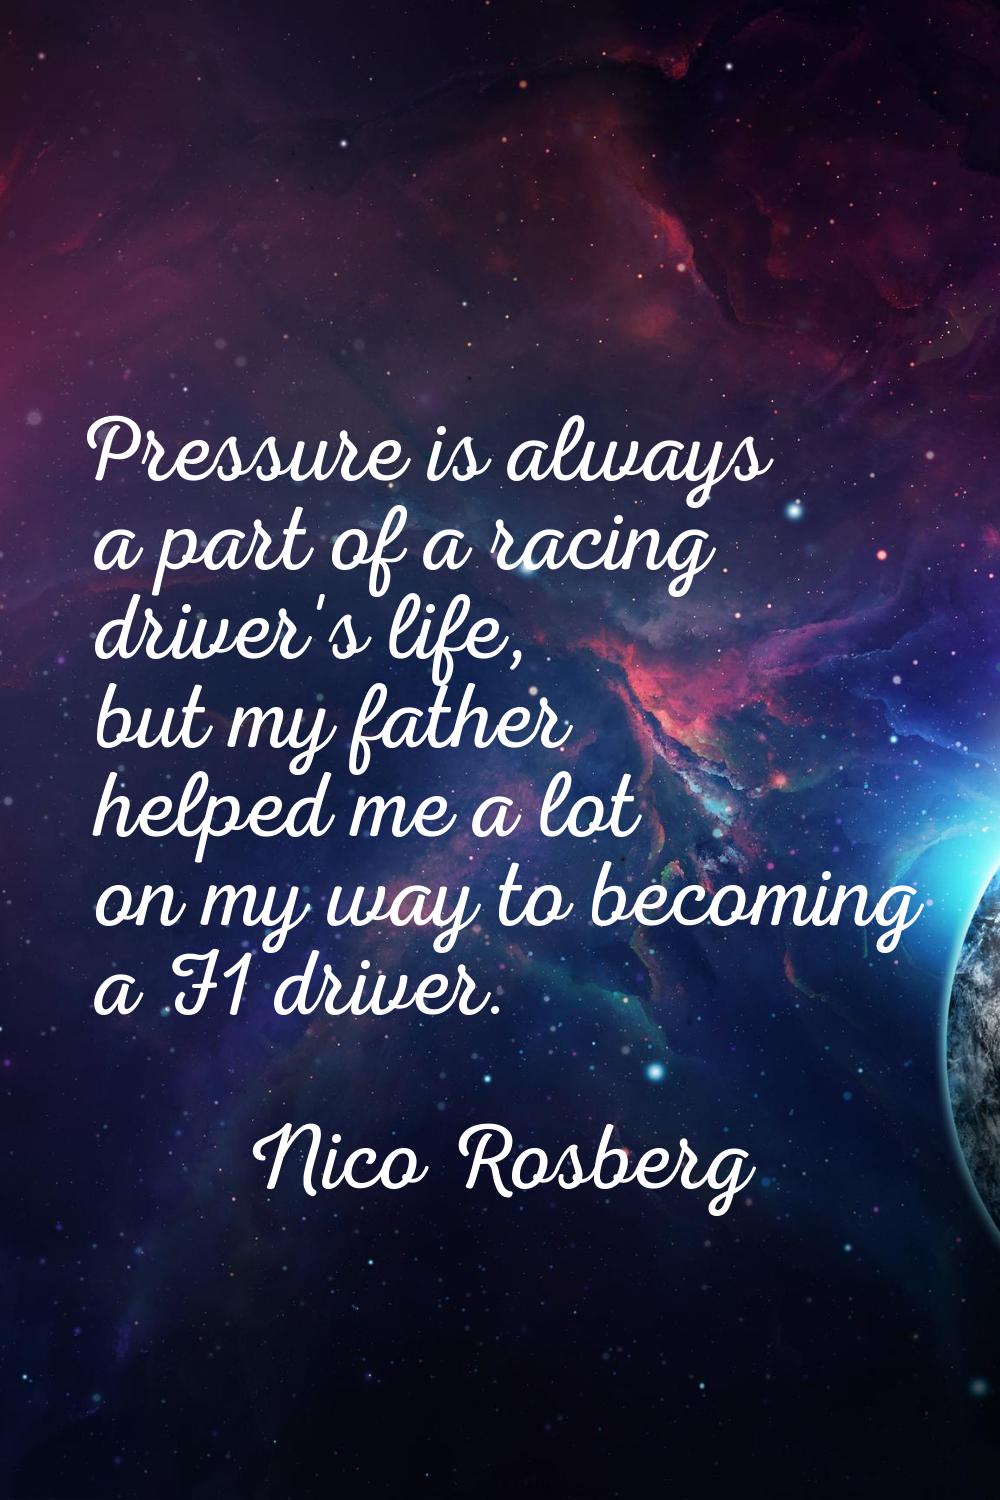 Pressure is always a part of a racing driver's life, but my father helped me a lot on my way to bec